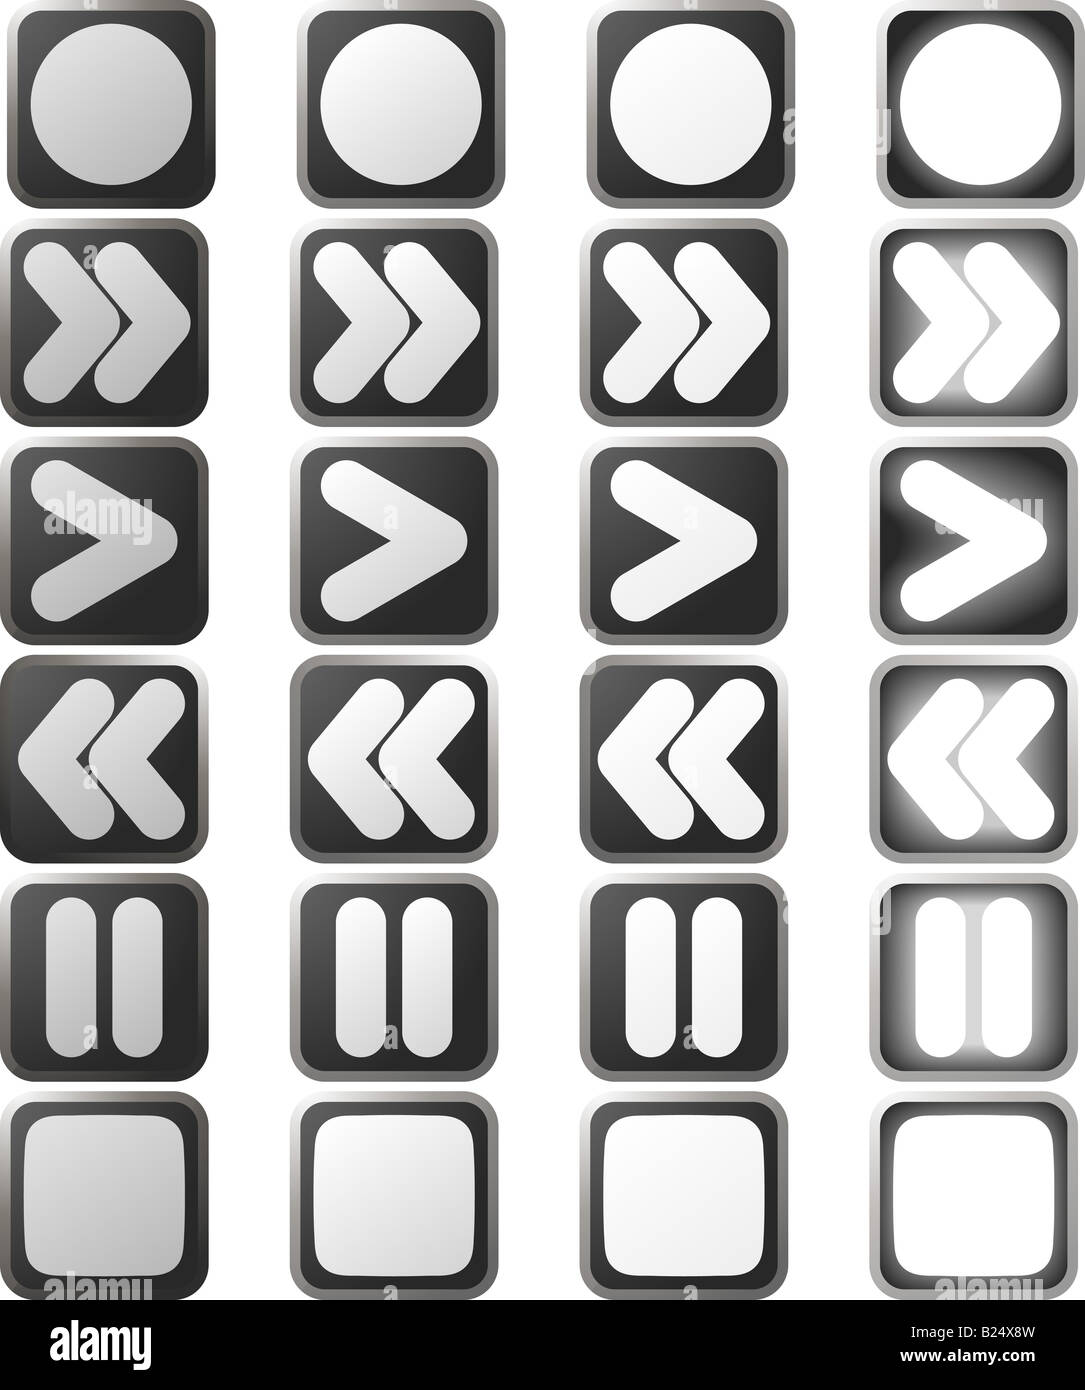 A set of white control panel button icons in various rollover state versions Stock Photo